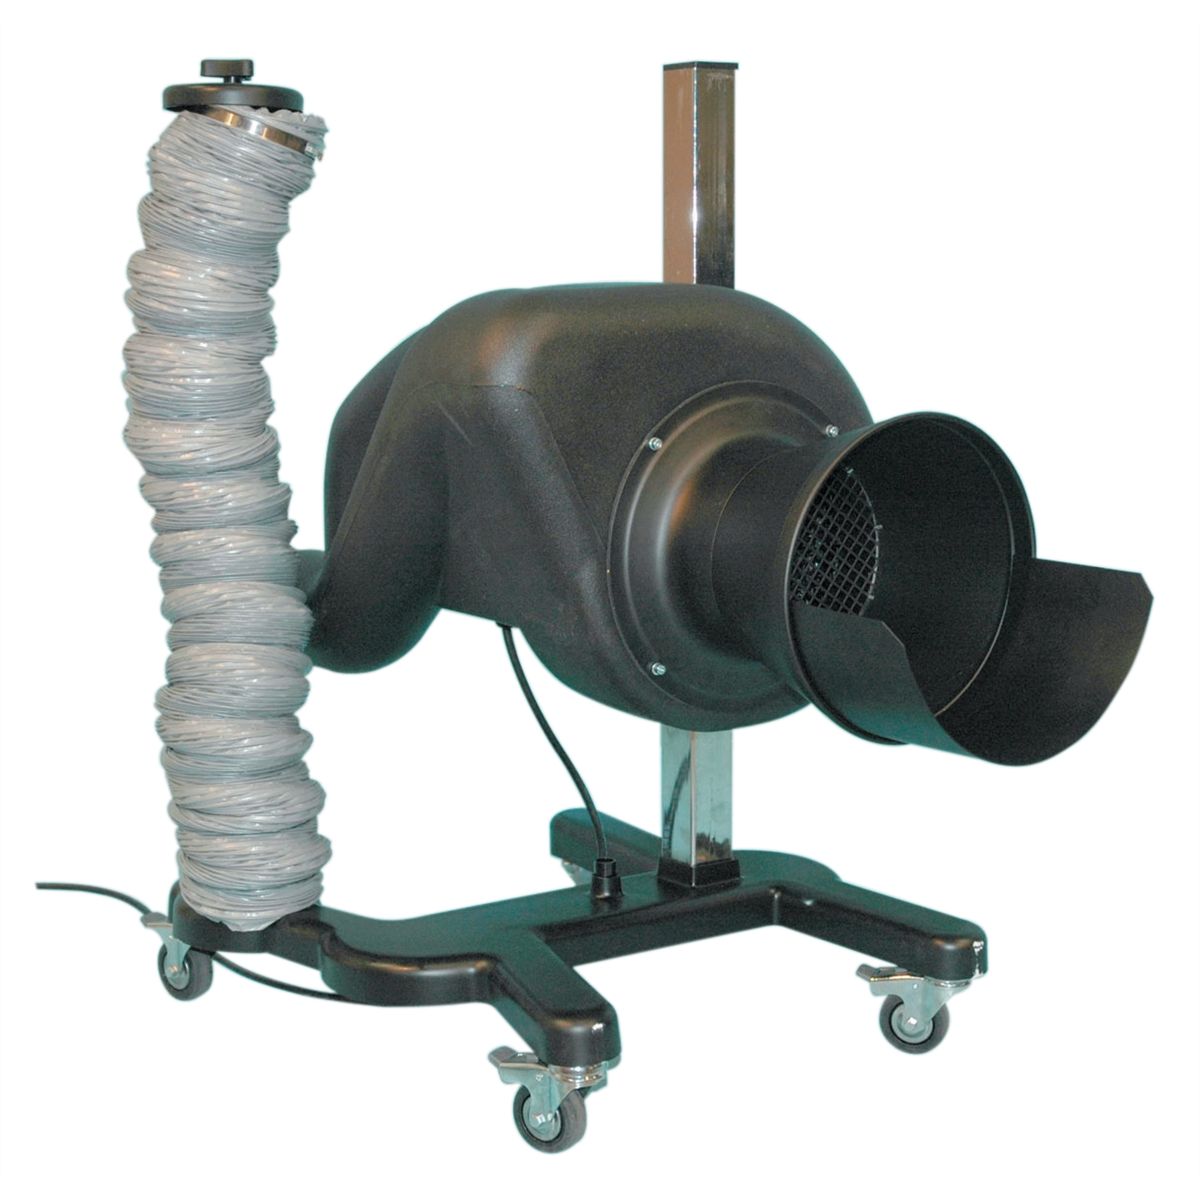 EuroVent Portable Exhaust Extraction System